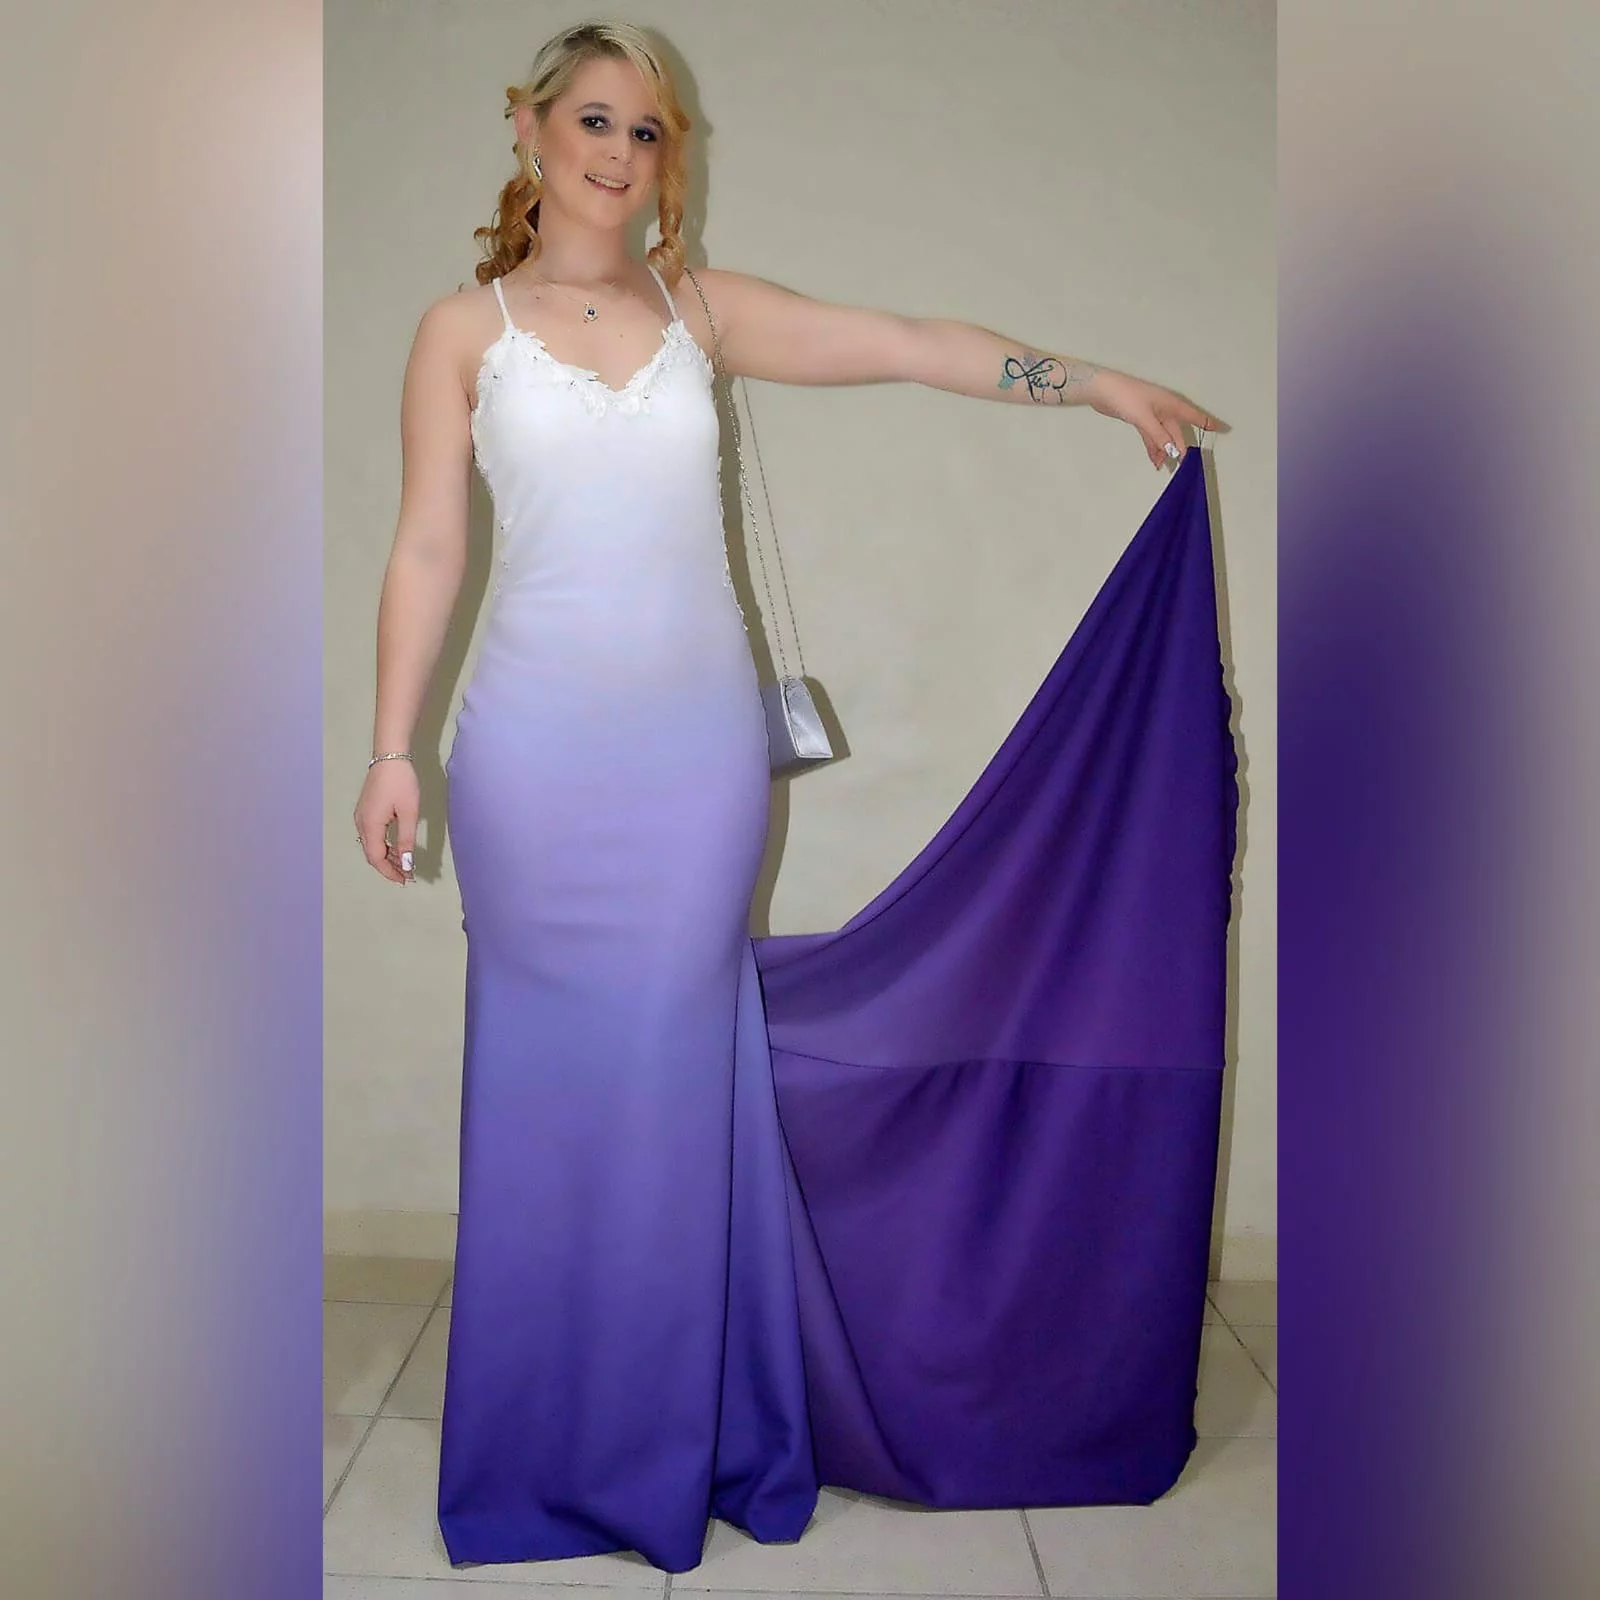 White & purple ombre soft mermaid prom dress 3 white & purple ombre soft mermaid prom dress with a sheer lace back. A sweetheart neckline. With a touch of silver beads and a train.